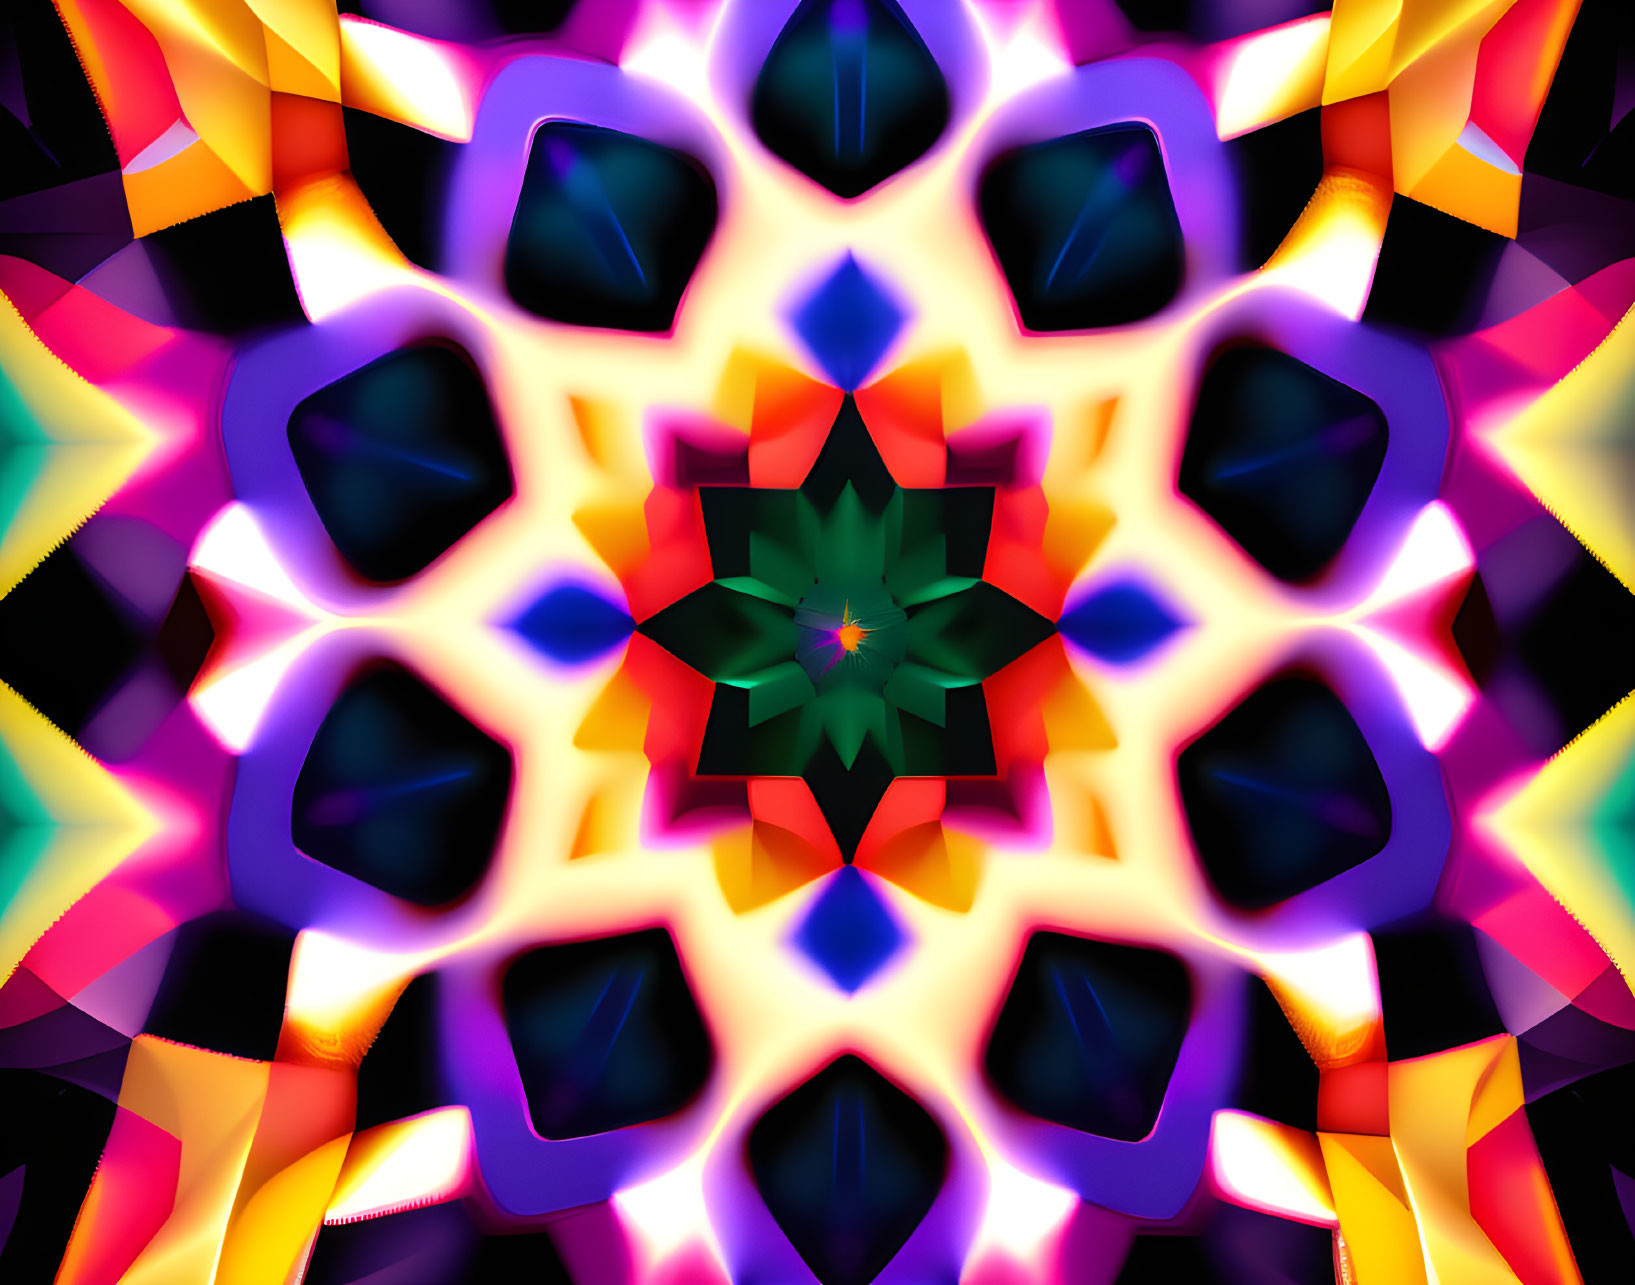 Colorful Symmetrical Kaleidoscopic Image with Purple to Yellow Spectrum